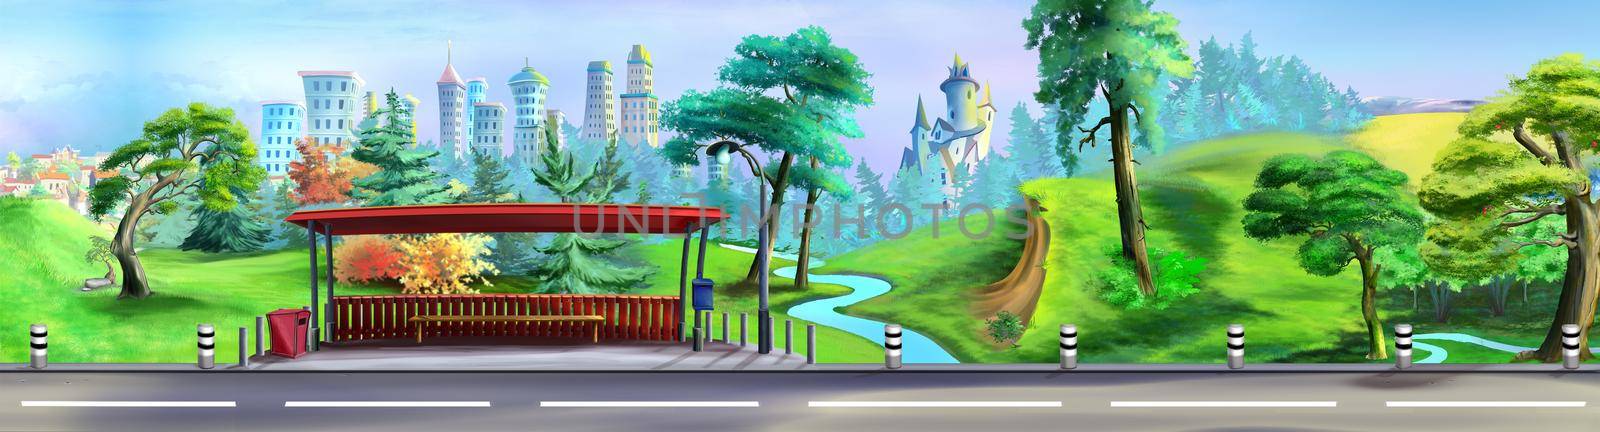 Bus stop on a Suburban highway along the city on a sunny day. Digital Painting Background, Illustration.